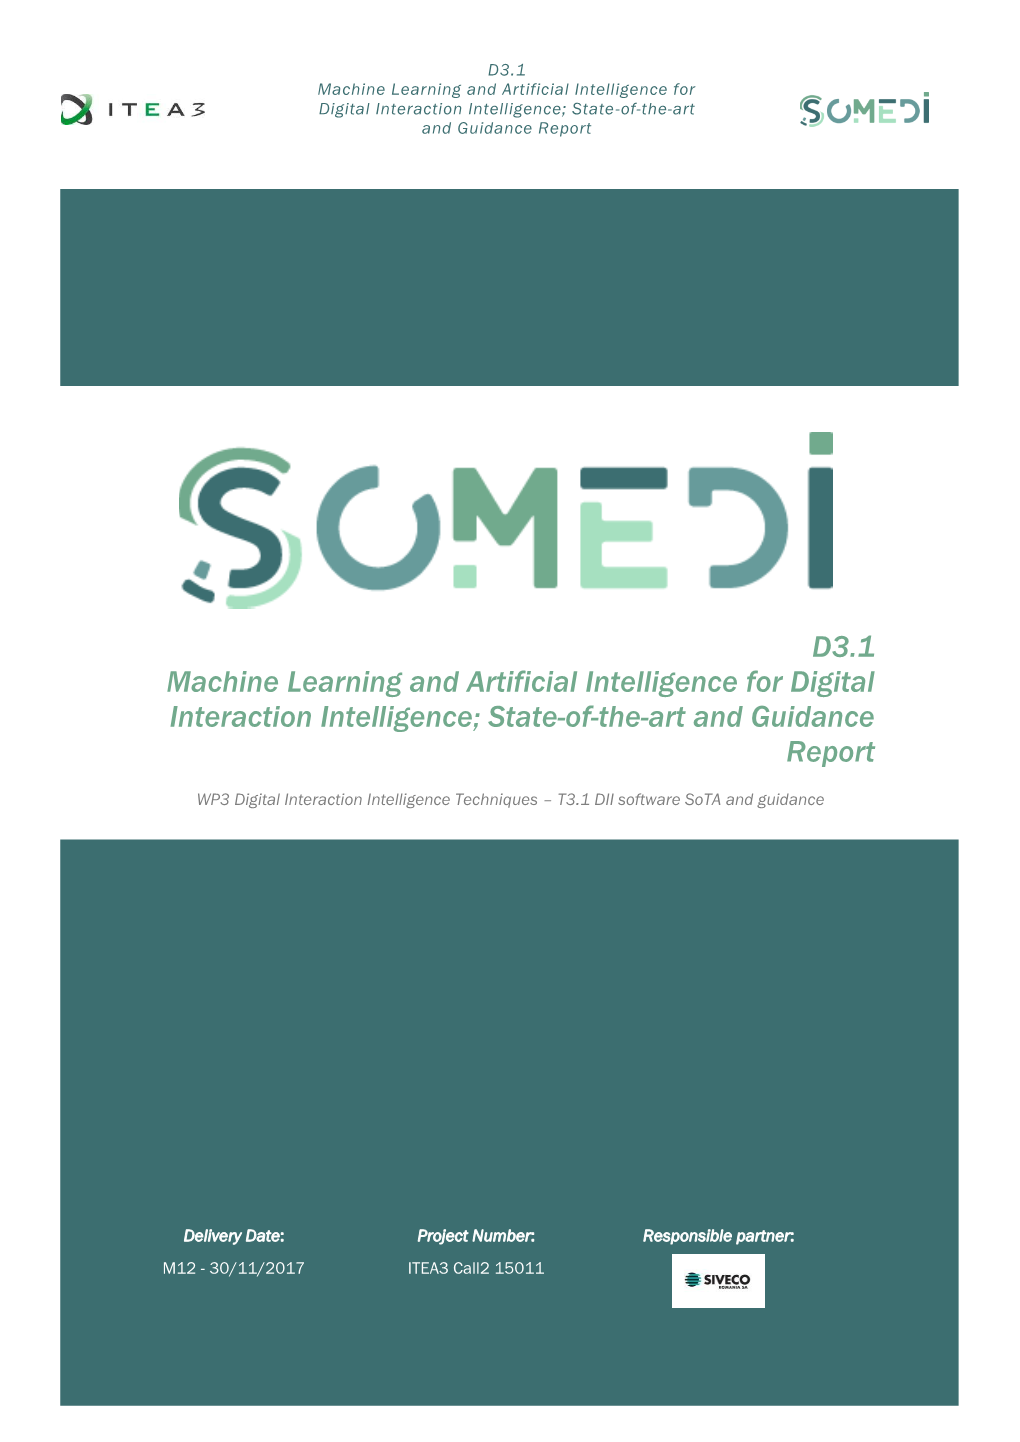 D3.1 Machine Learning and Artificial Intelligence for Digital Interaction Intelligence; State-Of-The-Art and Guidance Report